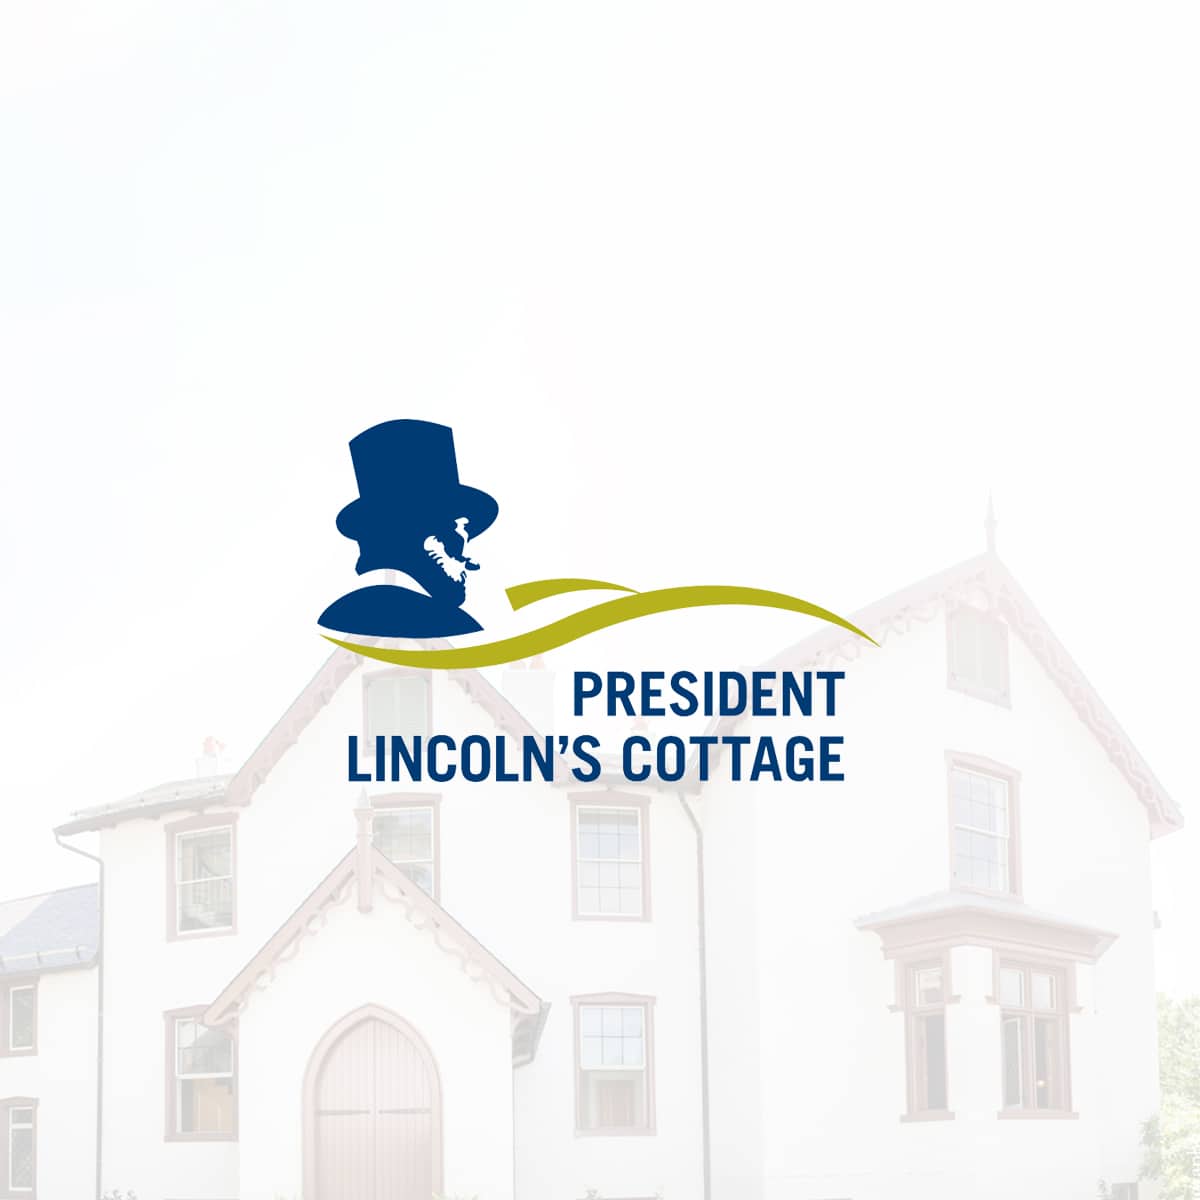 www.lincolncottage.org